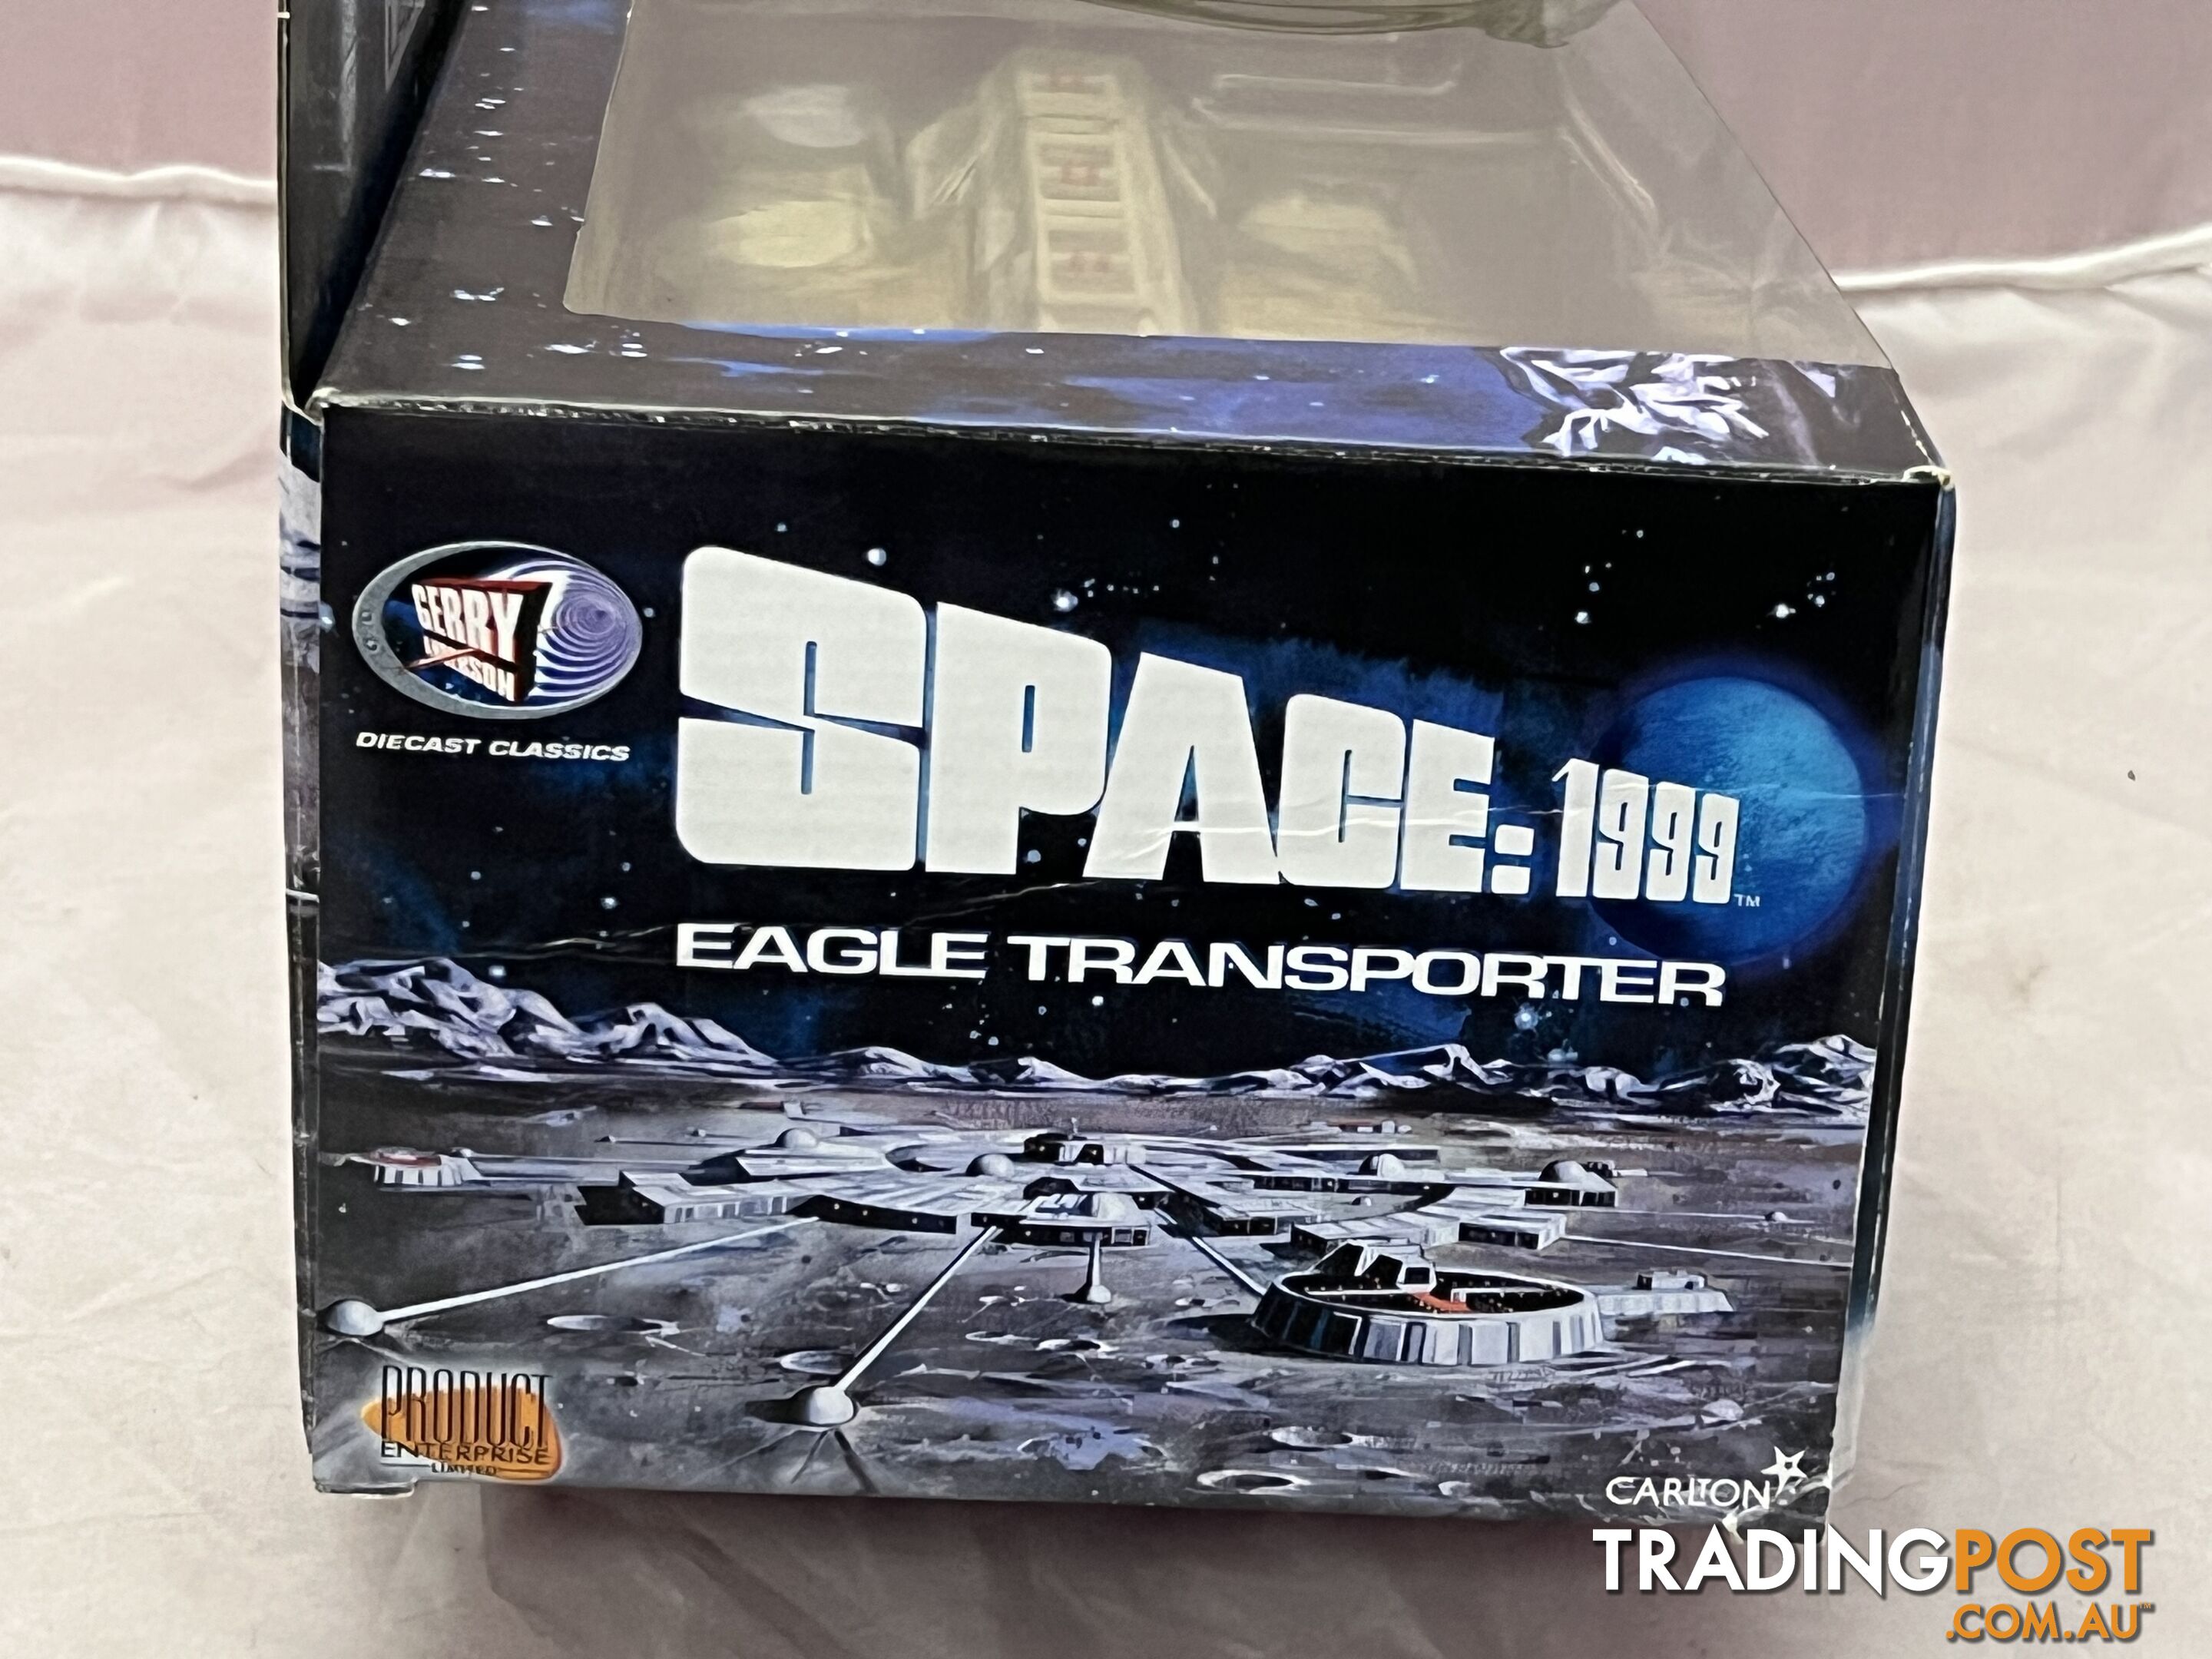 Space 1999 Special Edition Eagle Laboratory Product Enterprise